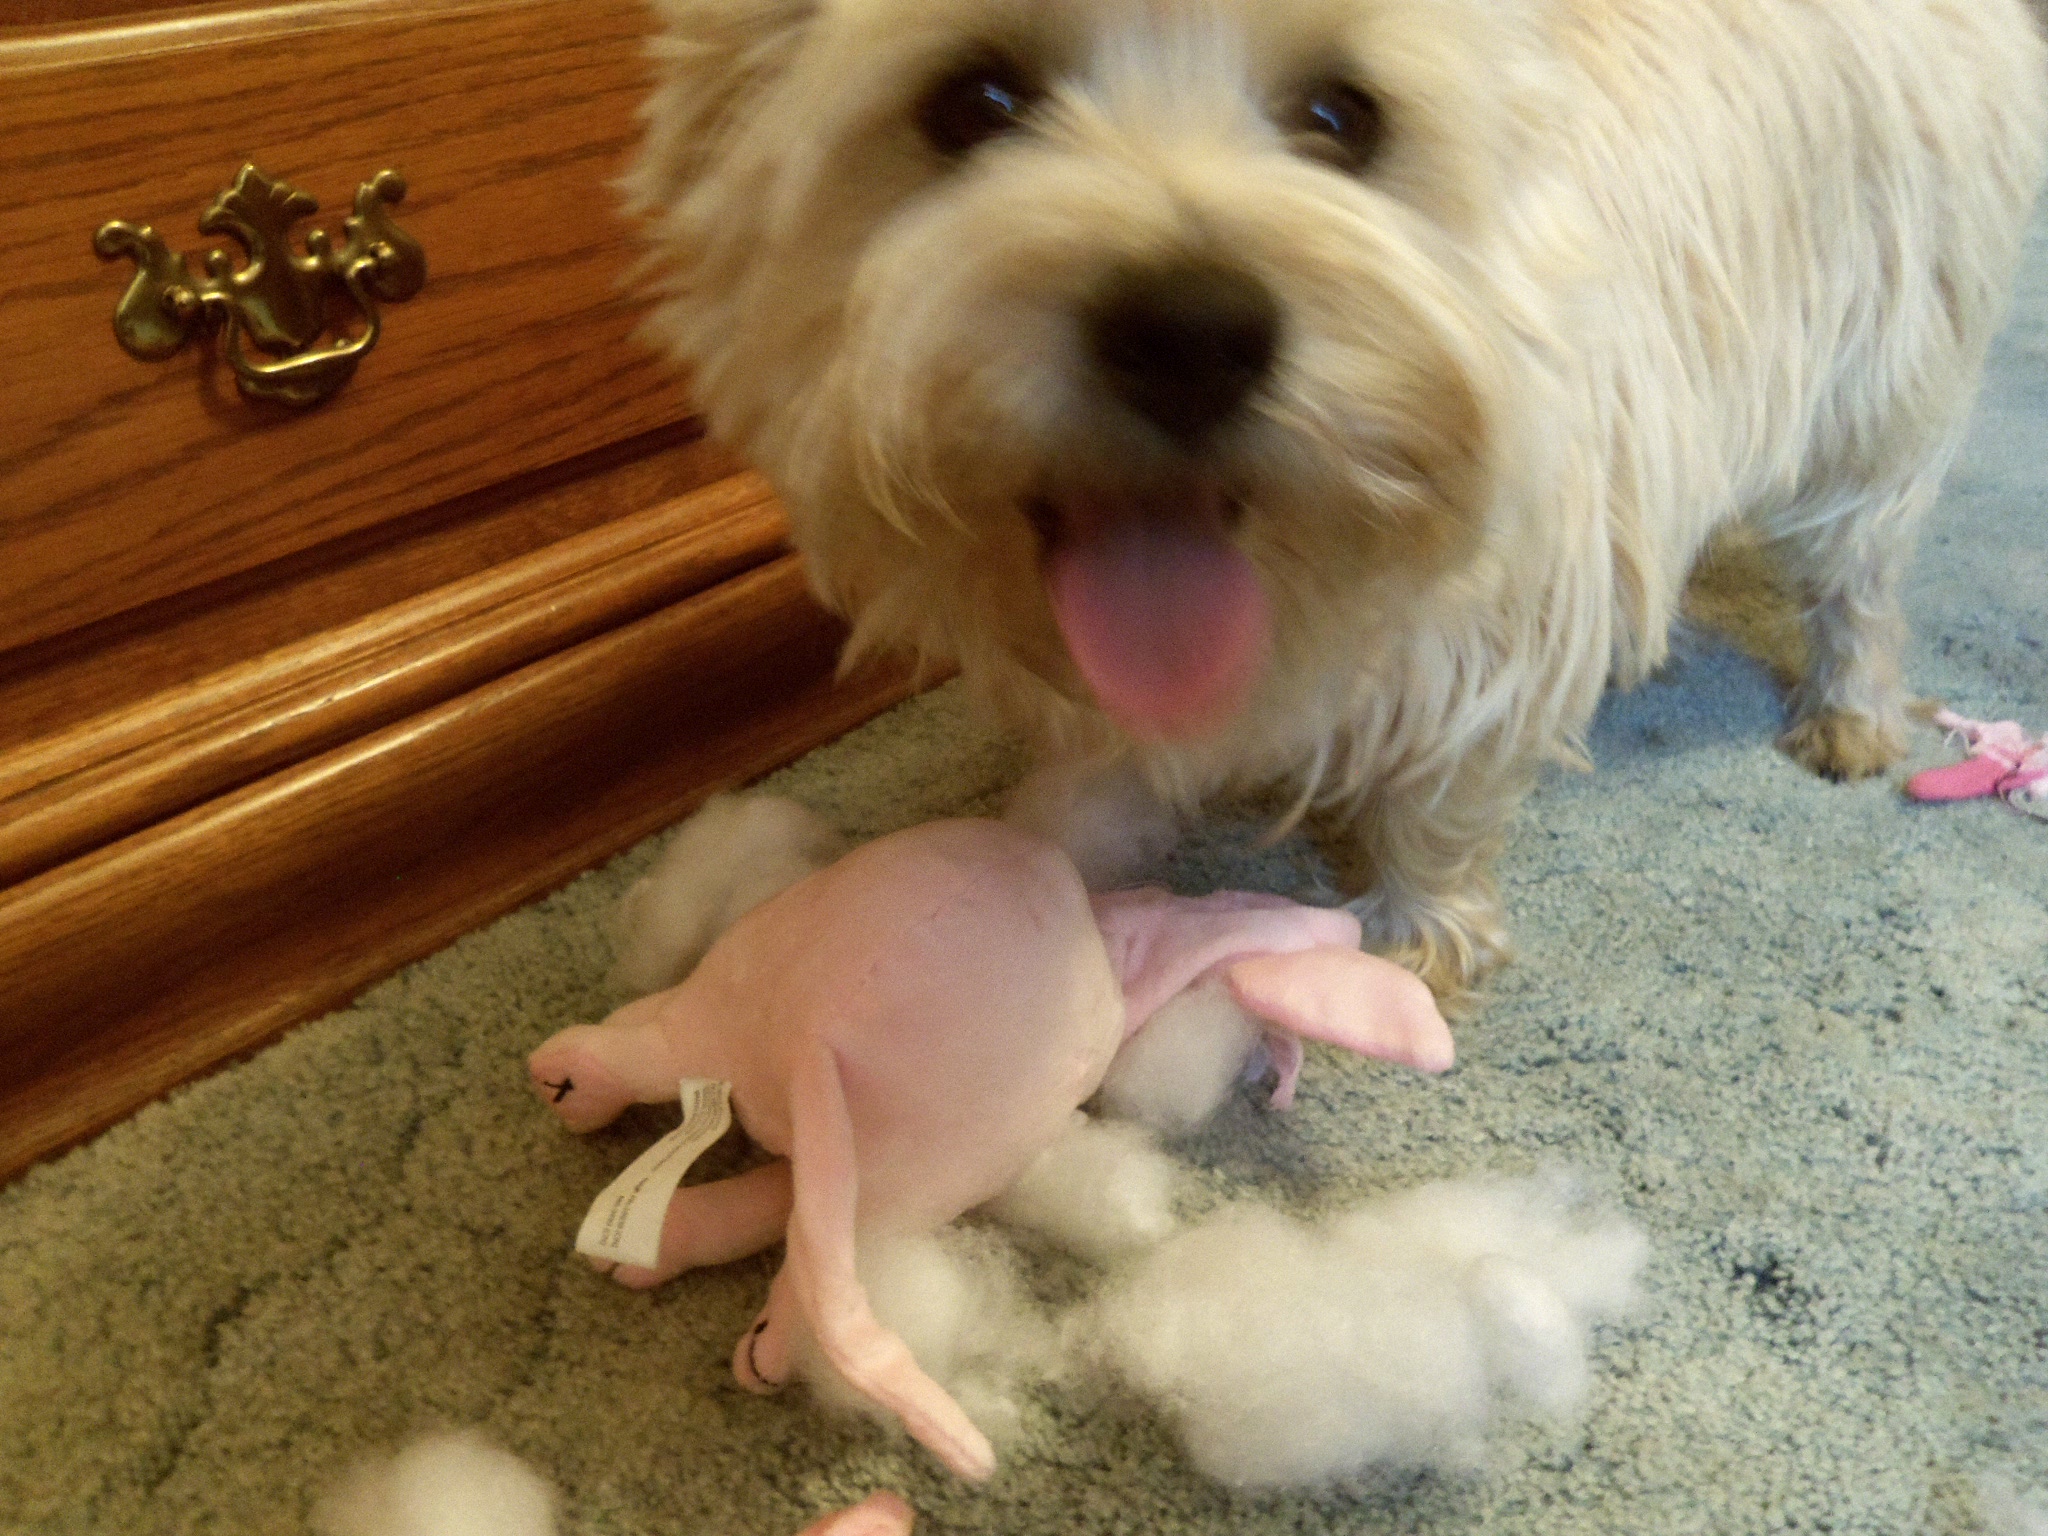 Cairn terrier stands over slain toy